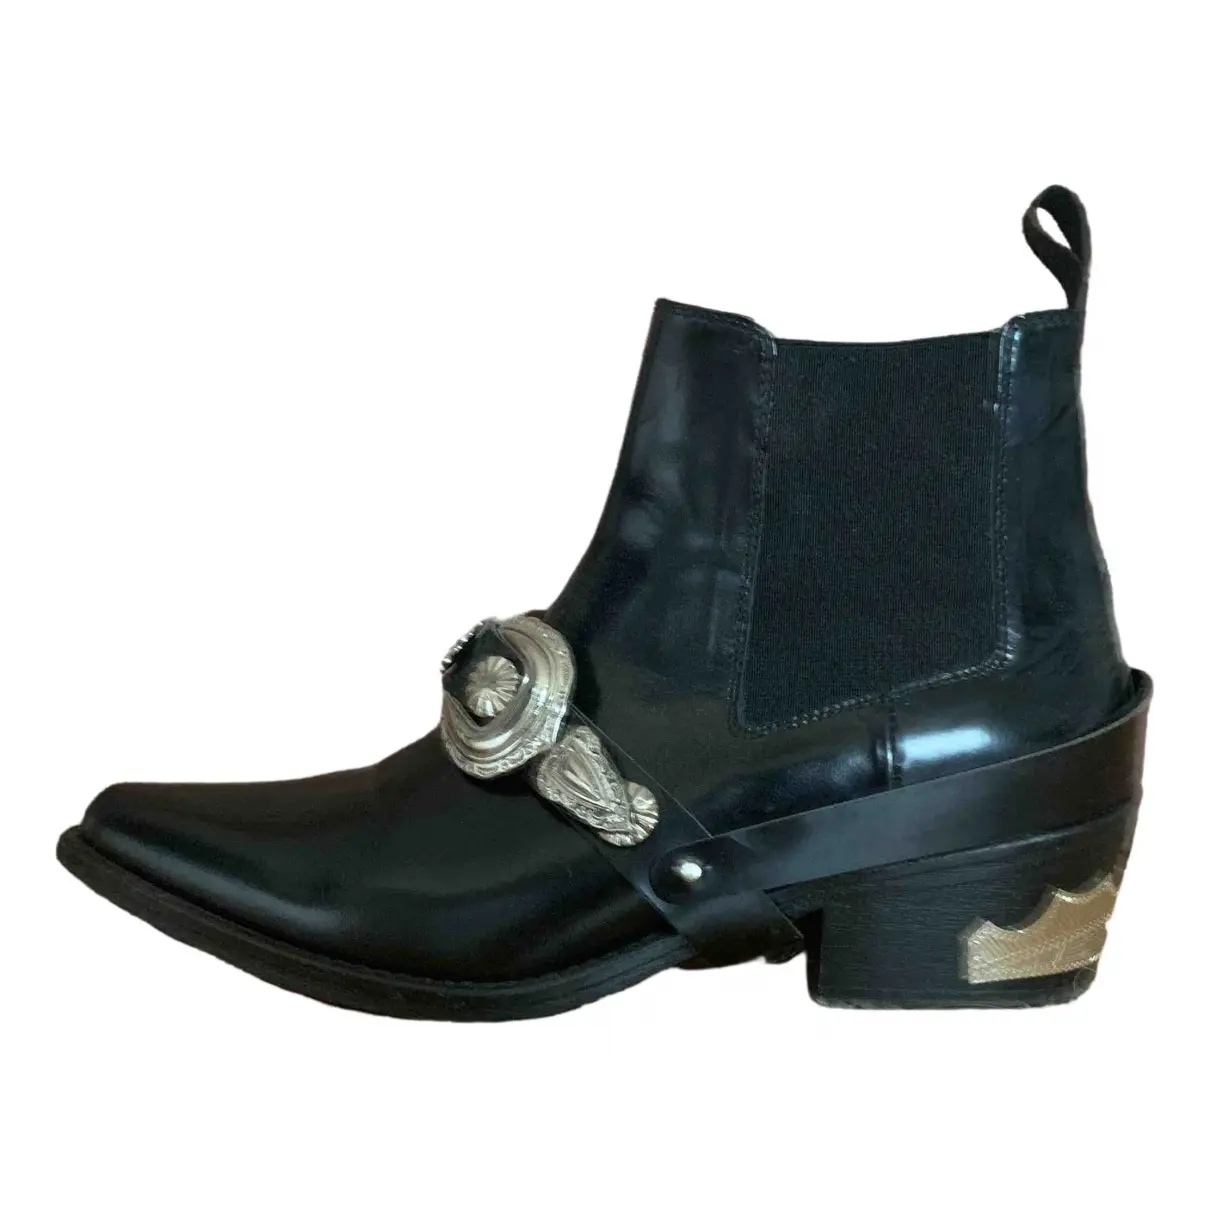 Leather western boots Toga Pulla